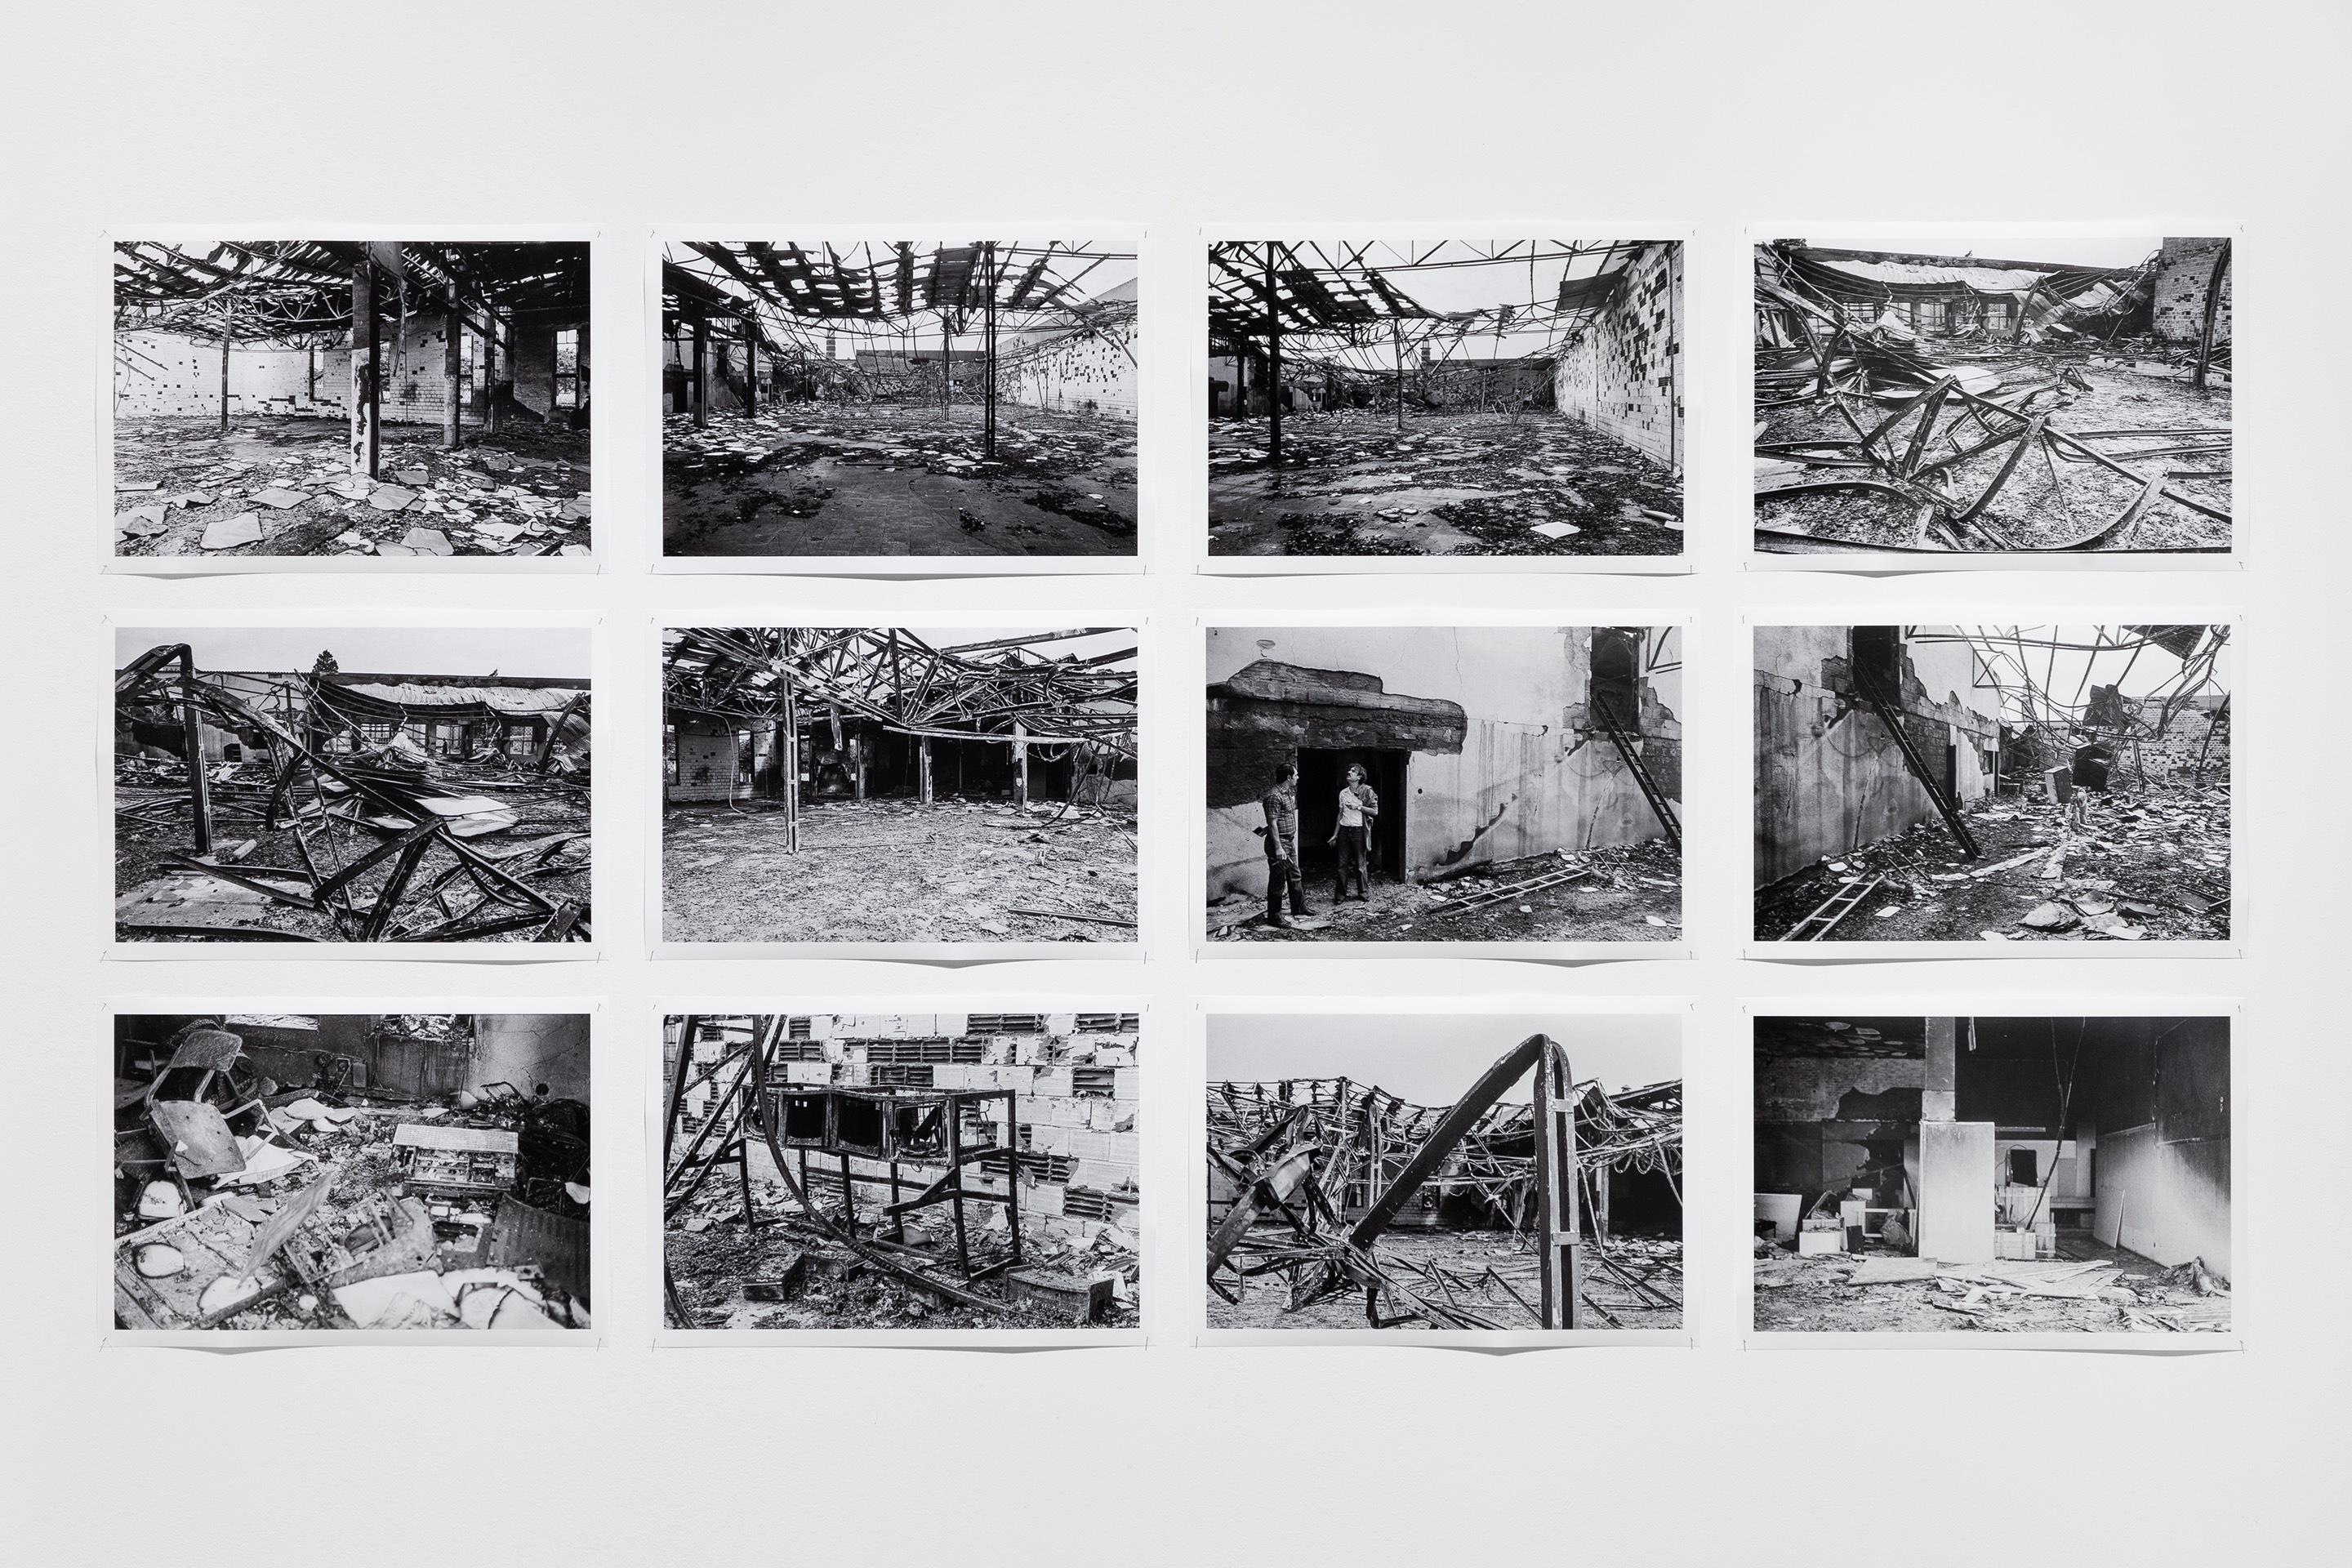 Photographs of the fire at the National Gallery of Modern Art, Lisbon, Julião Sarmento, 1981, included in Interferences. Emerging Urban Cultures (maat, 30/03–05/09/2022). Photo: Bruno Lopes, courtesy of Underdogs.